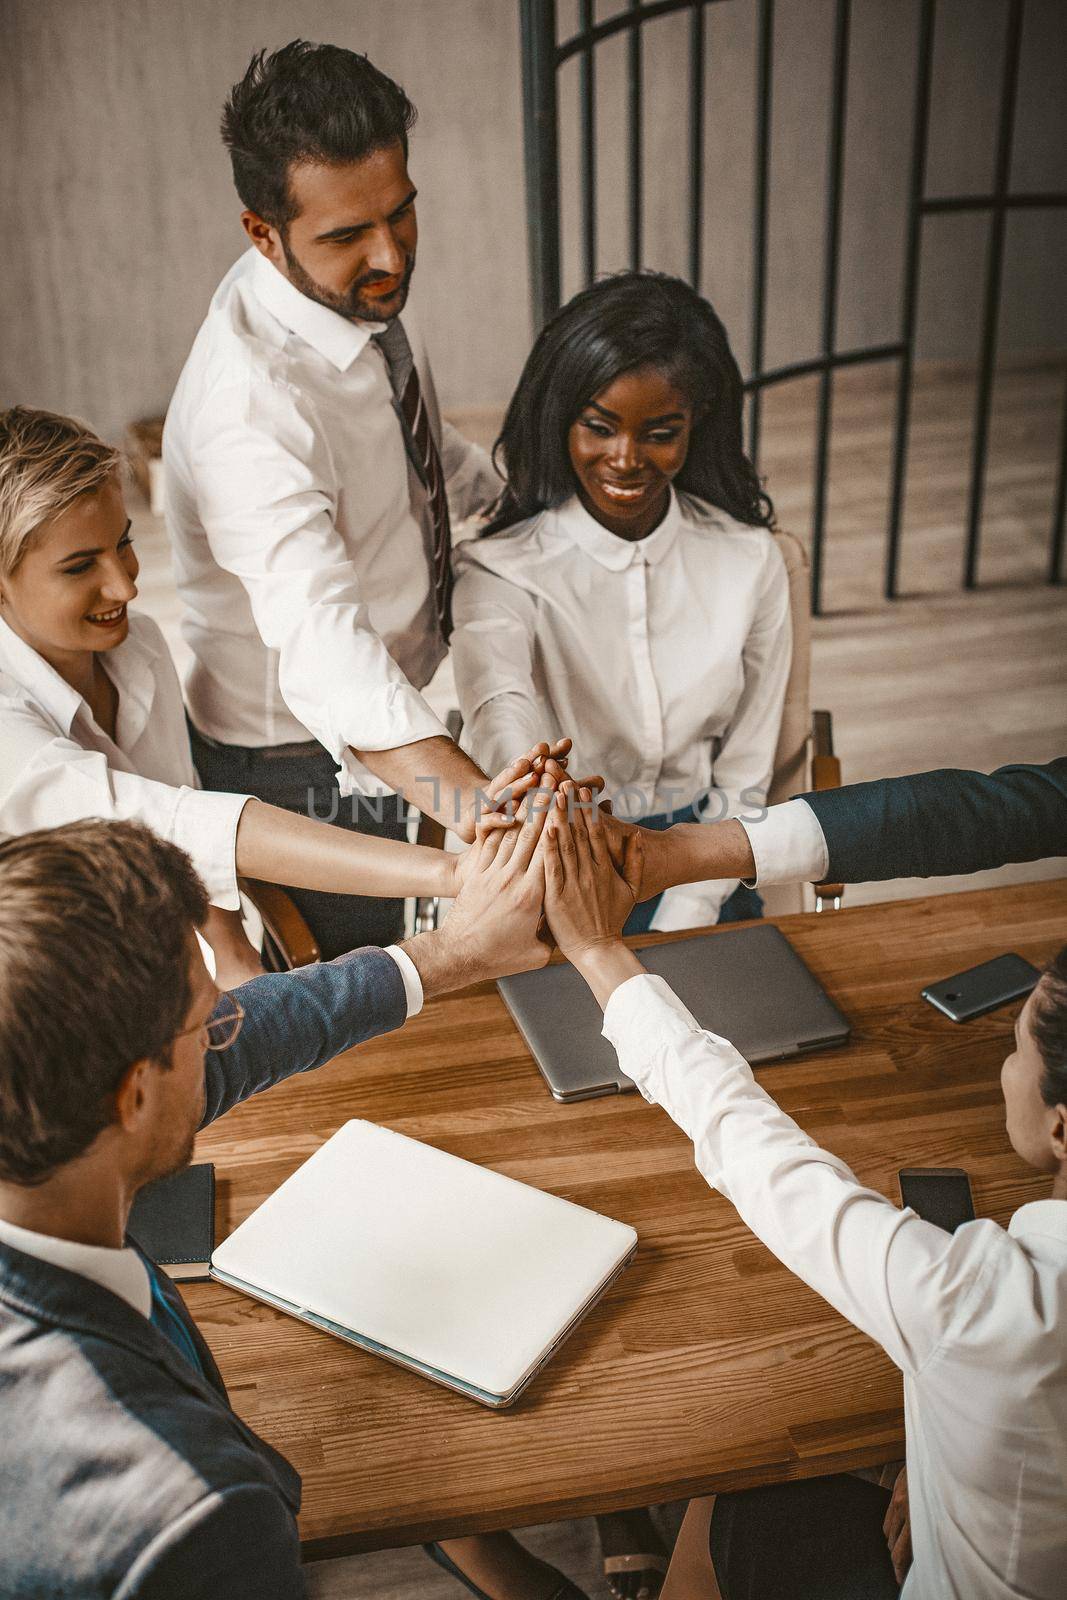 Smiling Business People Joined Their Hands In High Five As Gesture Of Unity, Diverse Team Of Male And Female Coworker Give High Five Sitting Together At Table In Boardroom, Toned Image